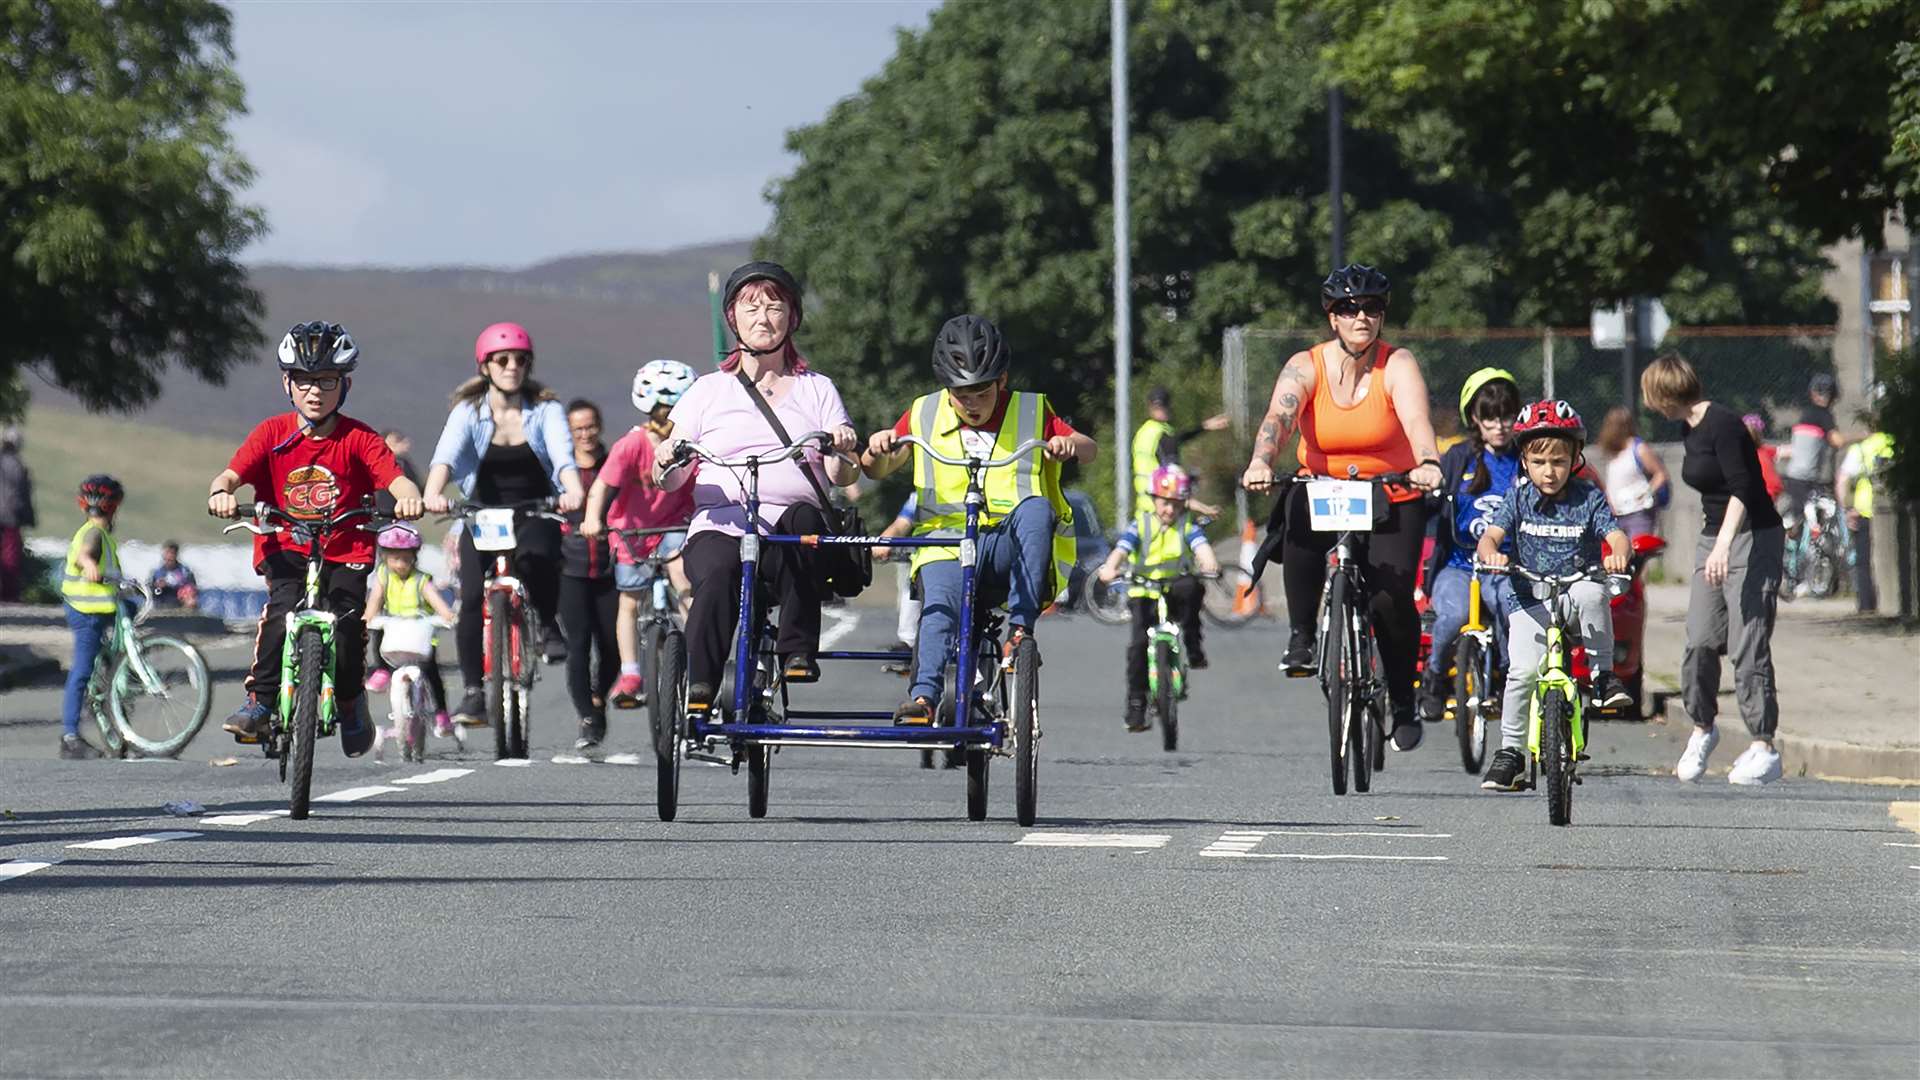 Some of the over 500 cyclists who enjoyed the fine weather during Sunday's Pedal Lerwick event. Photo: Kevin Jones